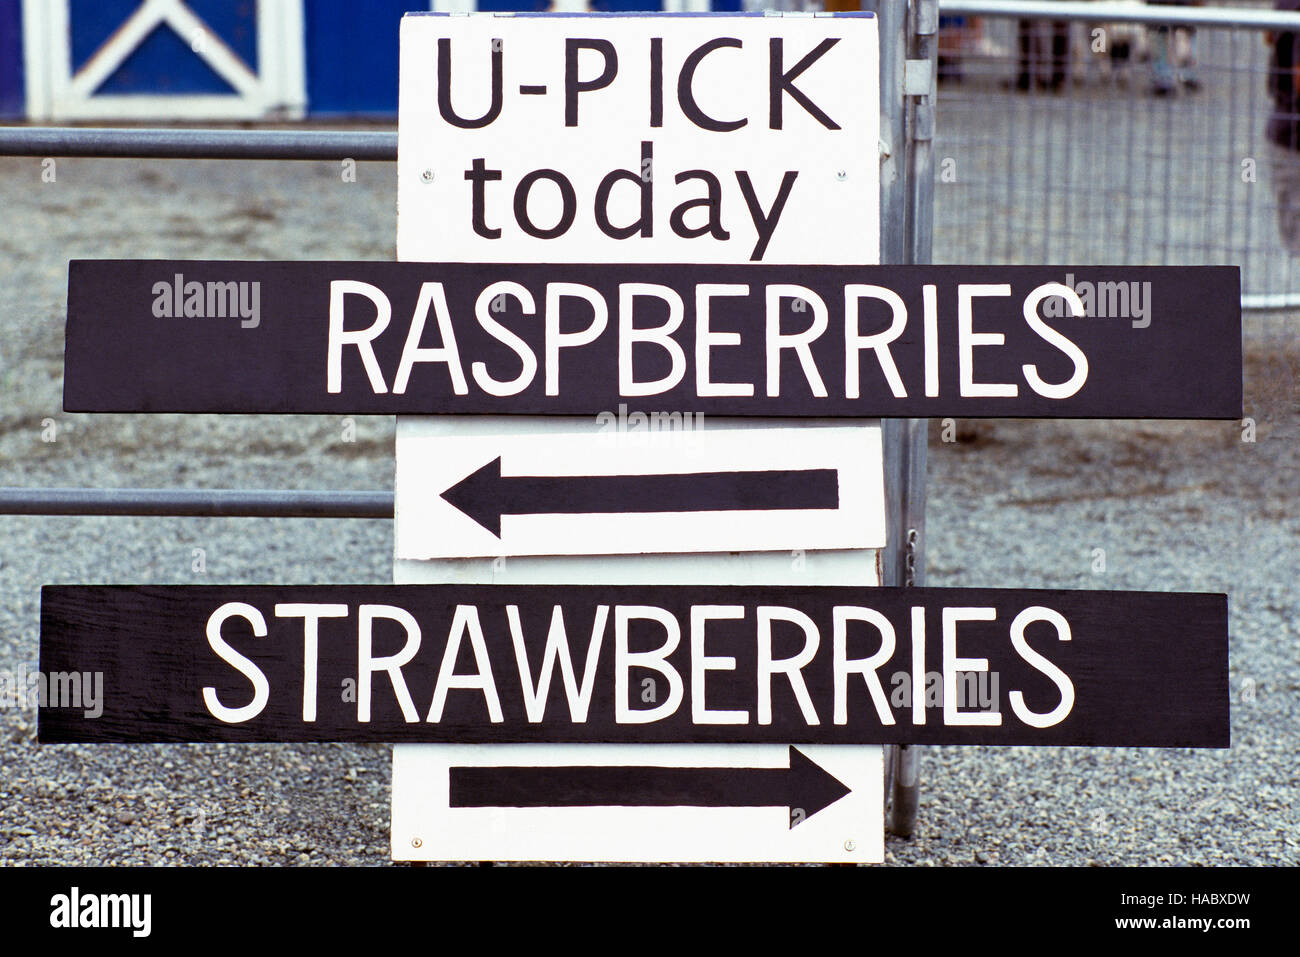 U-Pick Raspberries and Strawberries Sign and Directions for picking at Local Raspberry and Strawberry Farm Stock Photo